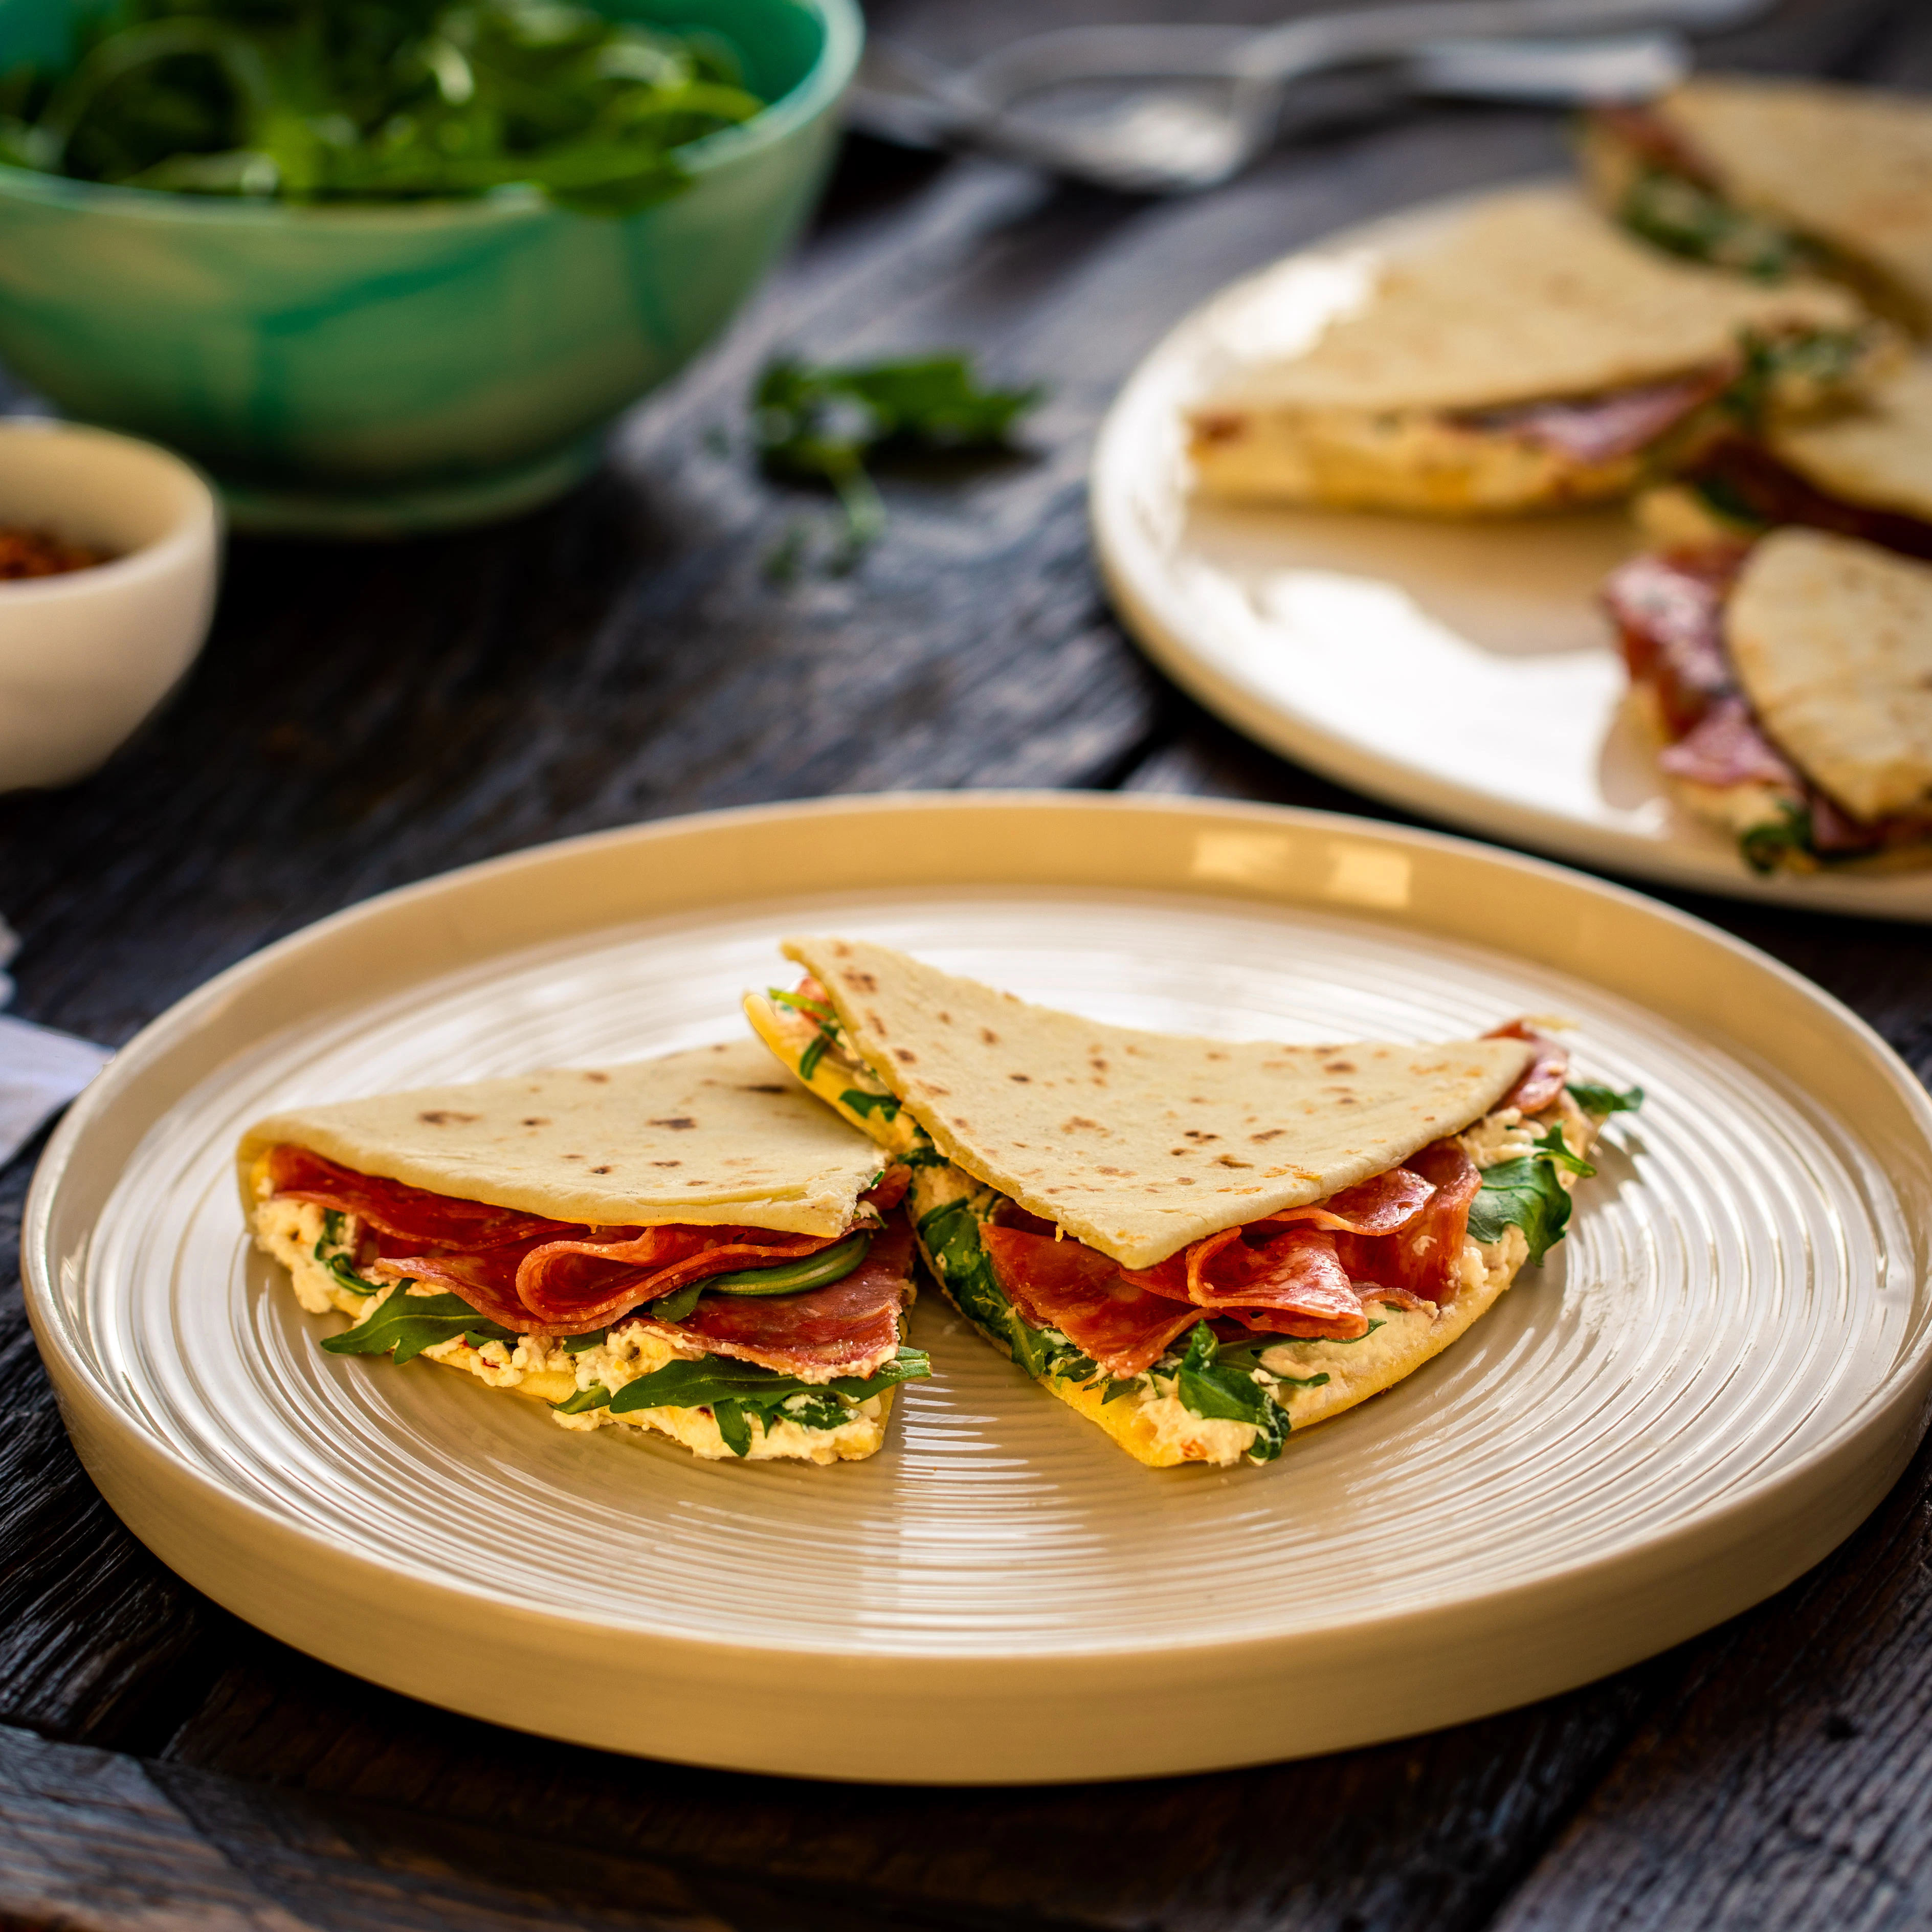 Piadina filled with Salami, Ricotta and Rocket on a table.